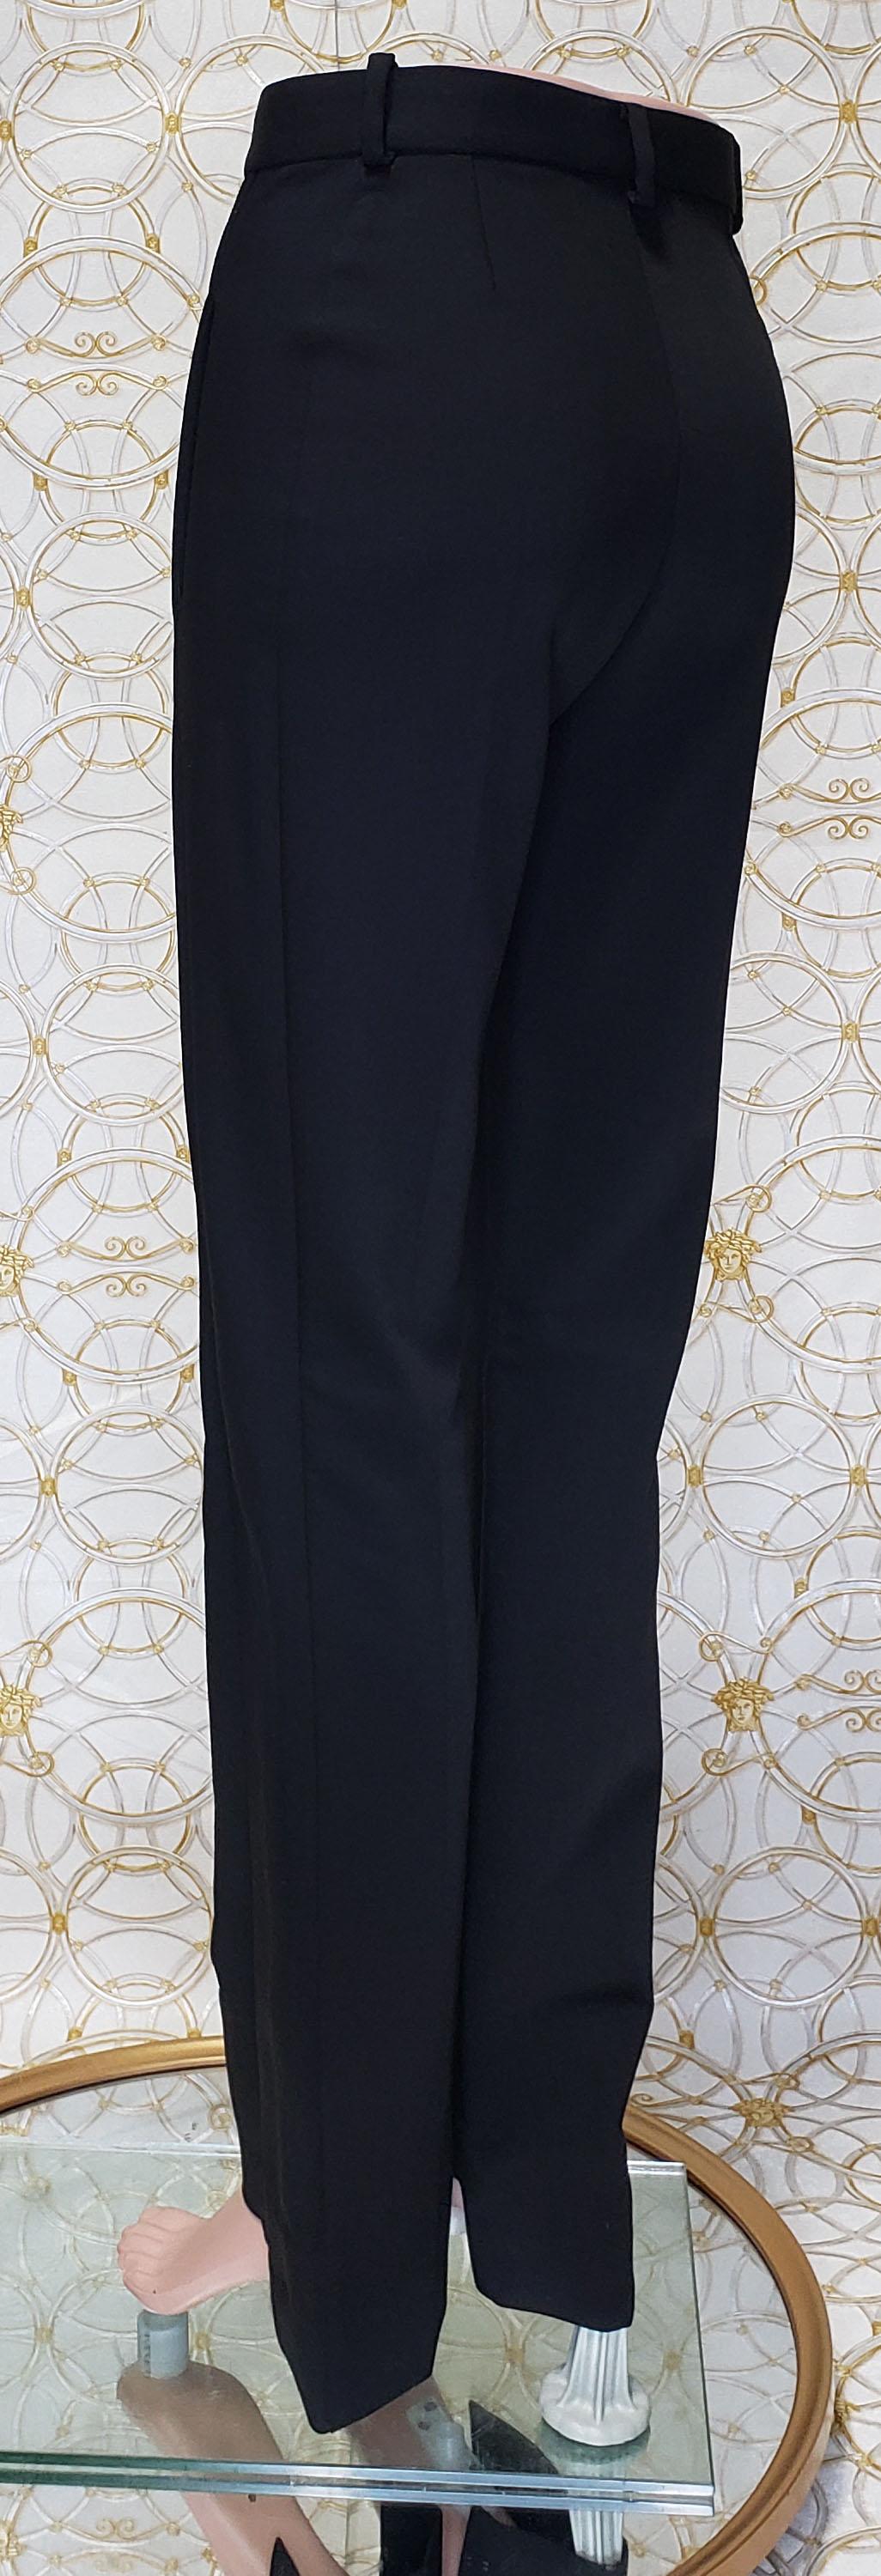 Black F/W15 Look #48 VERSACE BLACK CLASSIC WOOL PANTS size 38 - 4 For Sale